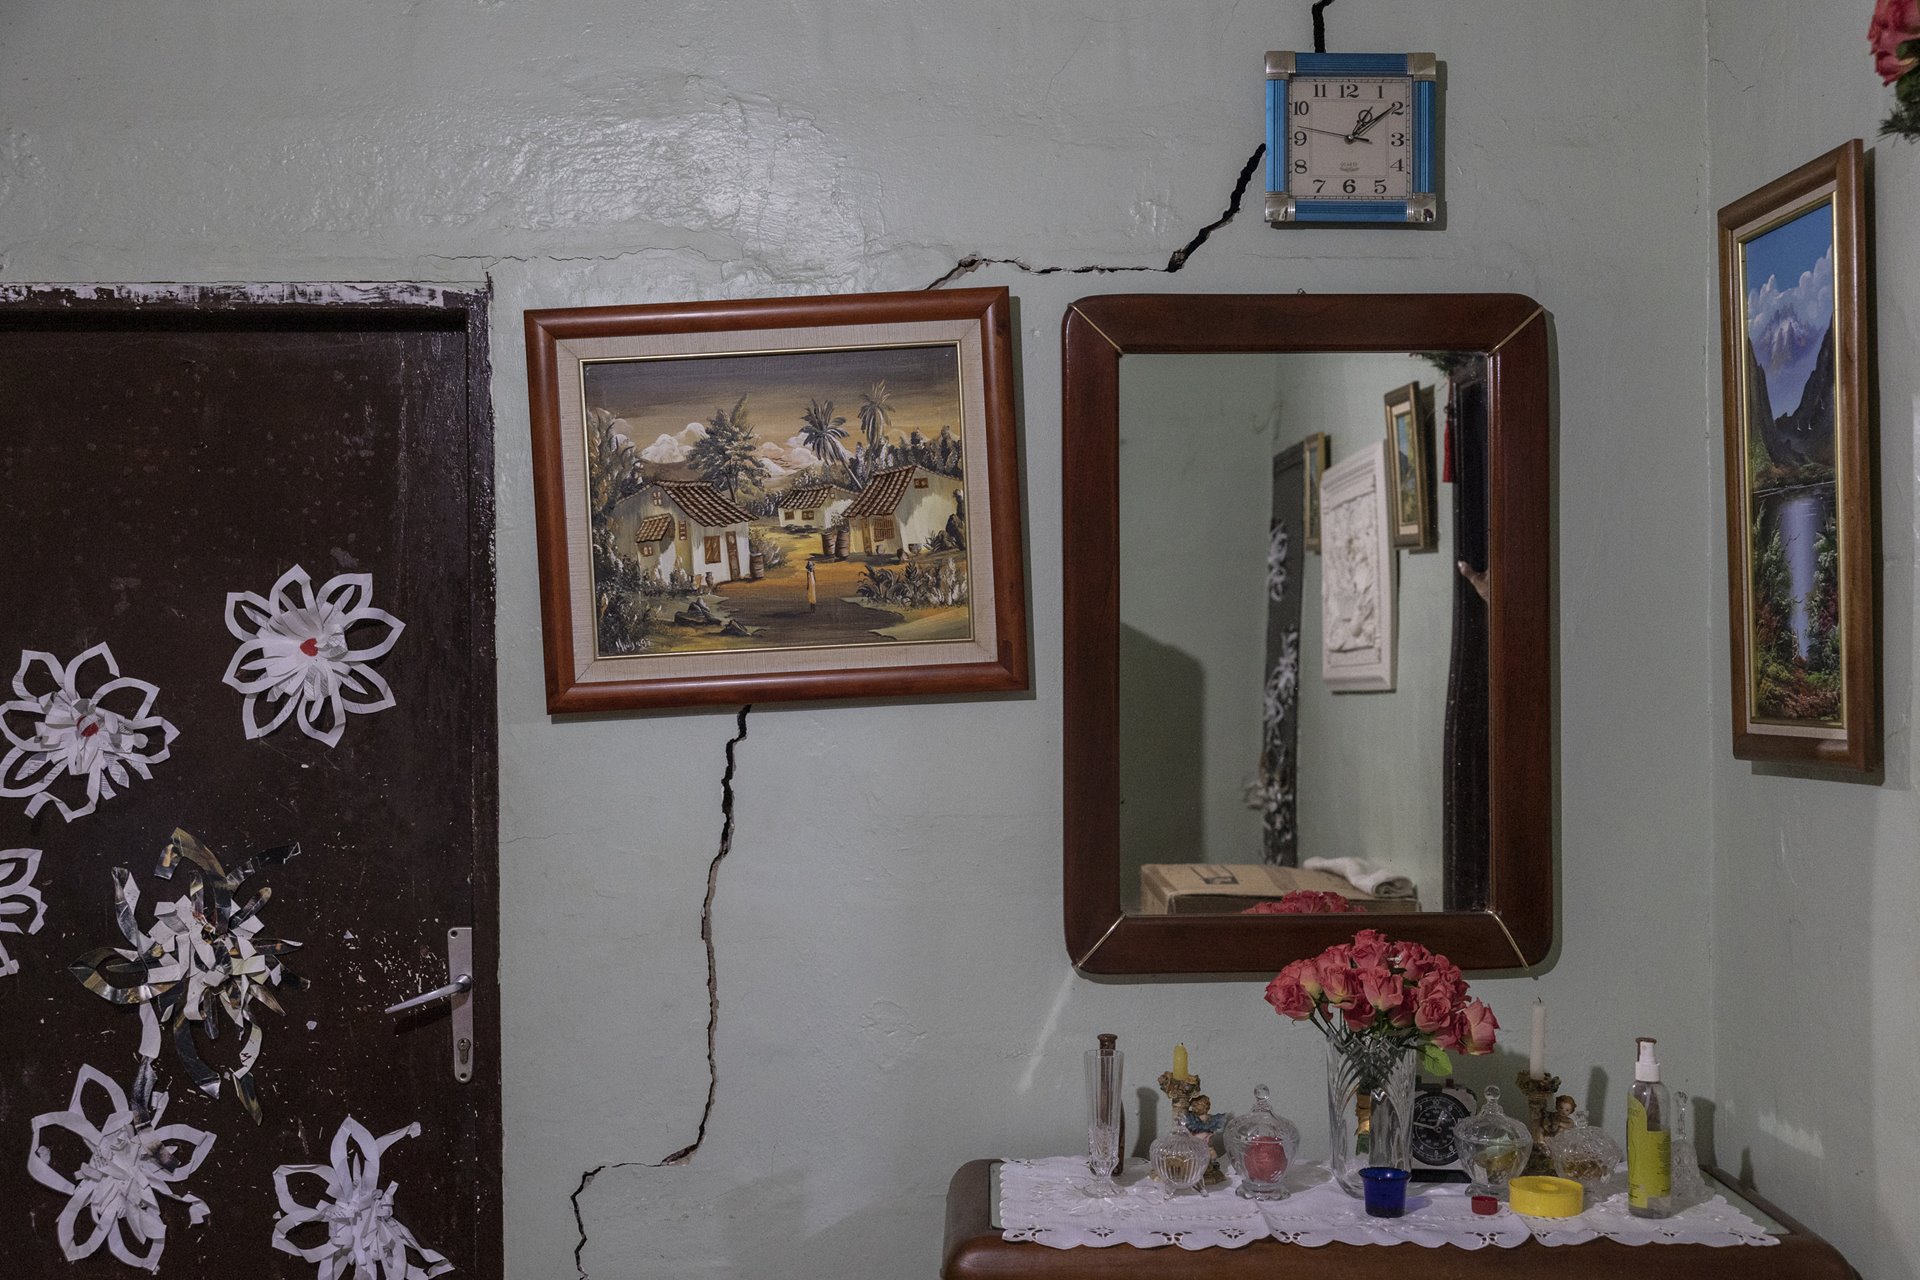 A crack caused by subsidence cuts through a wall in the home of Hilda Davalillo (67), in Campo Alegría, an oil community in Cabimas, Zulia State, Venezuela. Hilda was asked to move out due to the high risk of collapse, but she was not given another place to live, so stayed.<br />
<br />
Campo Alegría is one of a number of settlements built specifically for workers with the now-ailing state oil company PDVSA, though these days many residents no longer work for the company. Once seen as a symbol of the rising Venezuelan middle class, many such neighborhoods are now falling apart due to subsidence caused by oil drilling, and residents experience lack of basic services.